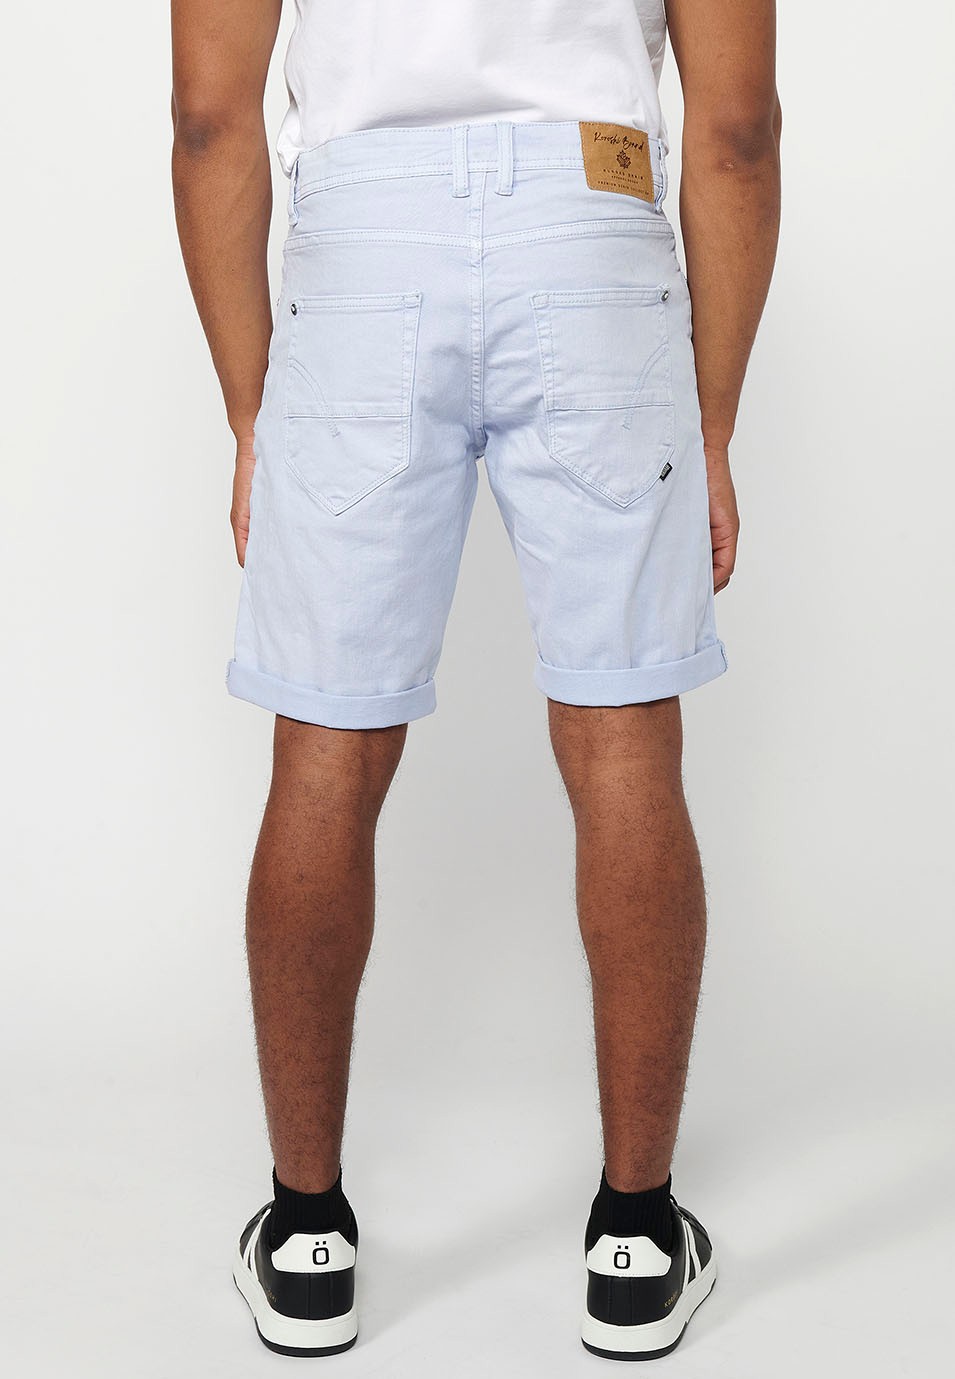 Denim Bermuda shorts with cuffed finish and front zipper and button closure. Five pockets, one blue color pocket for men 5